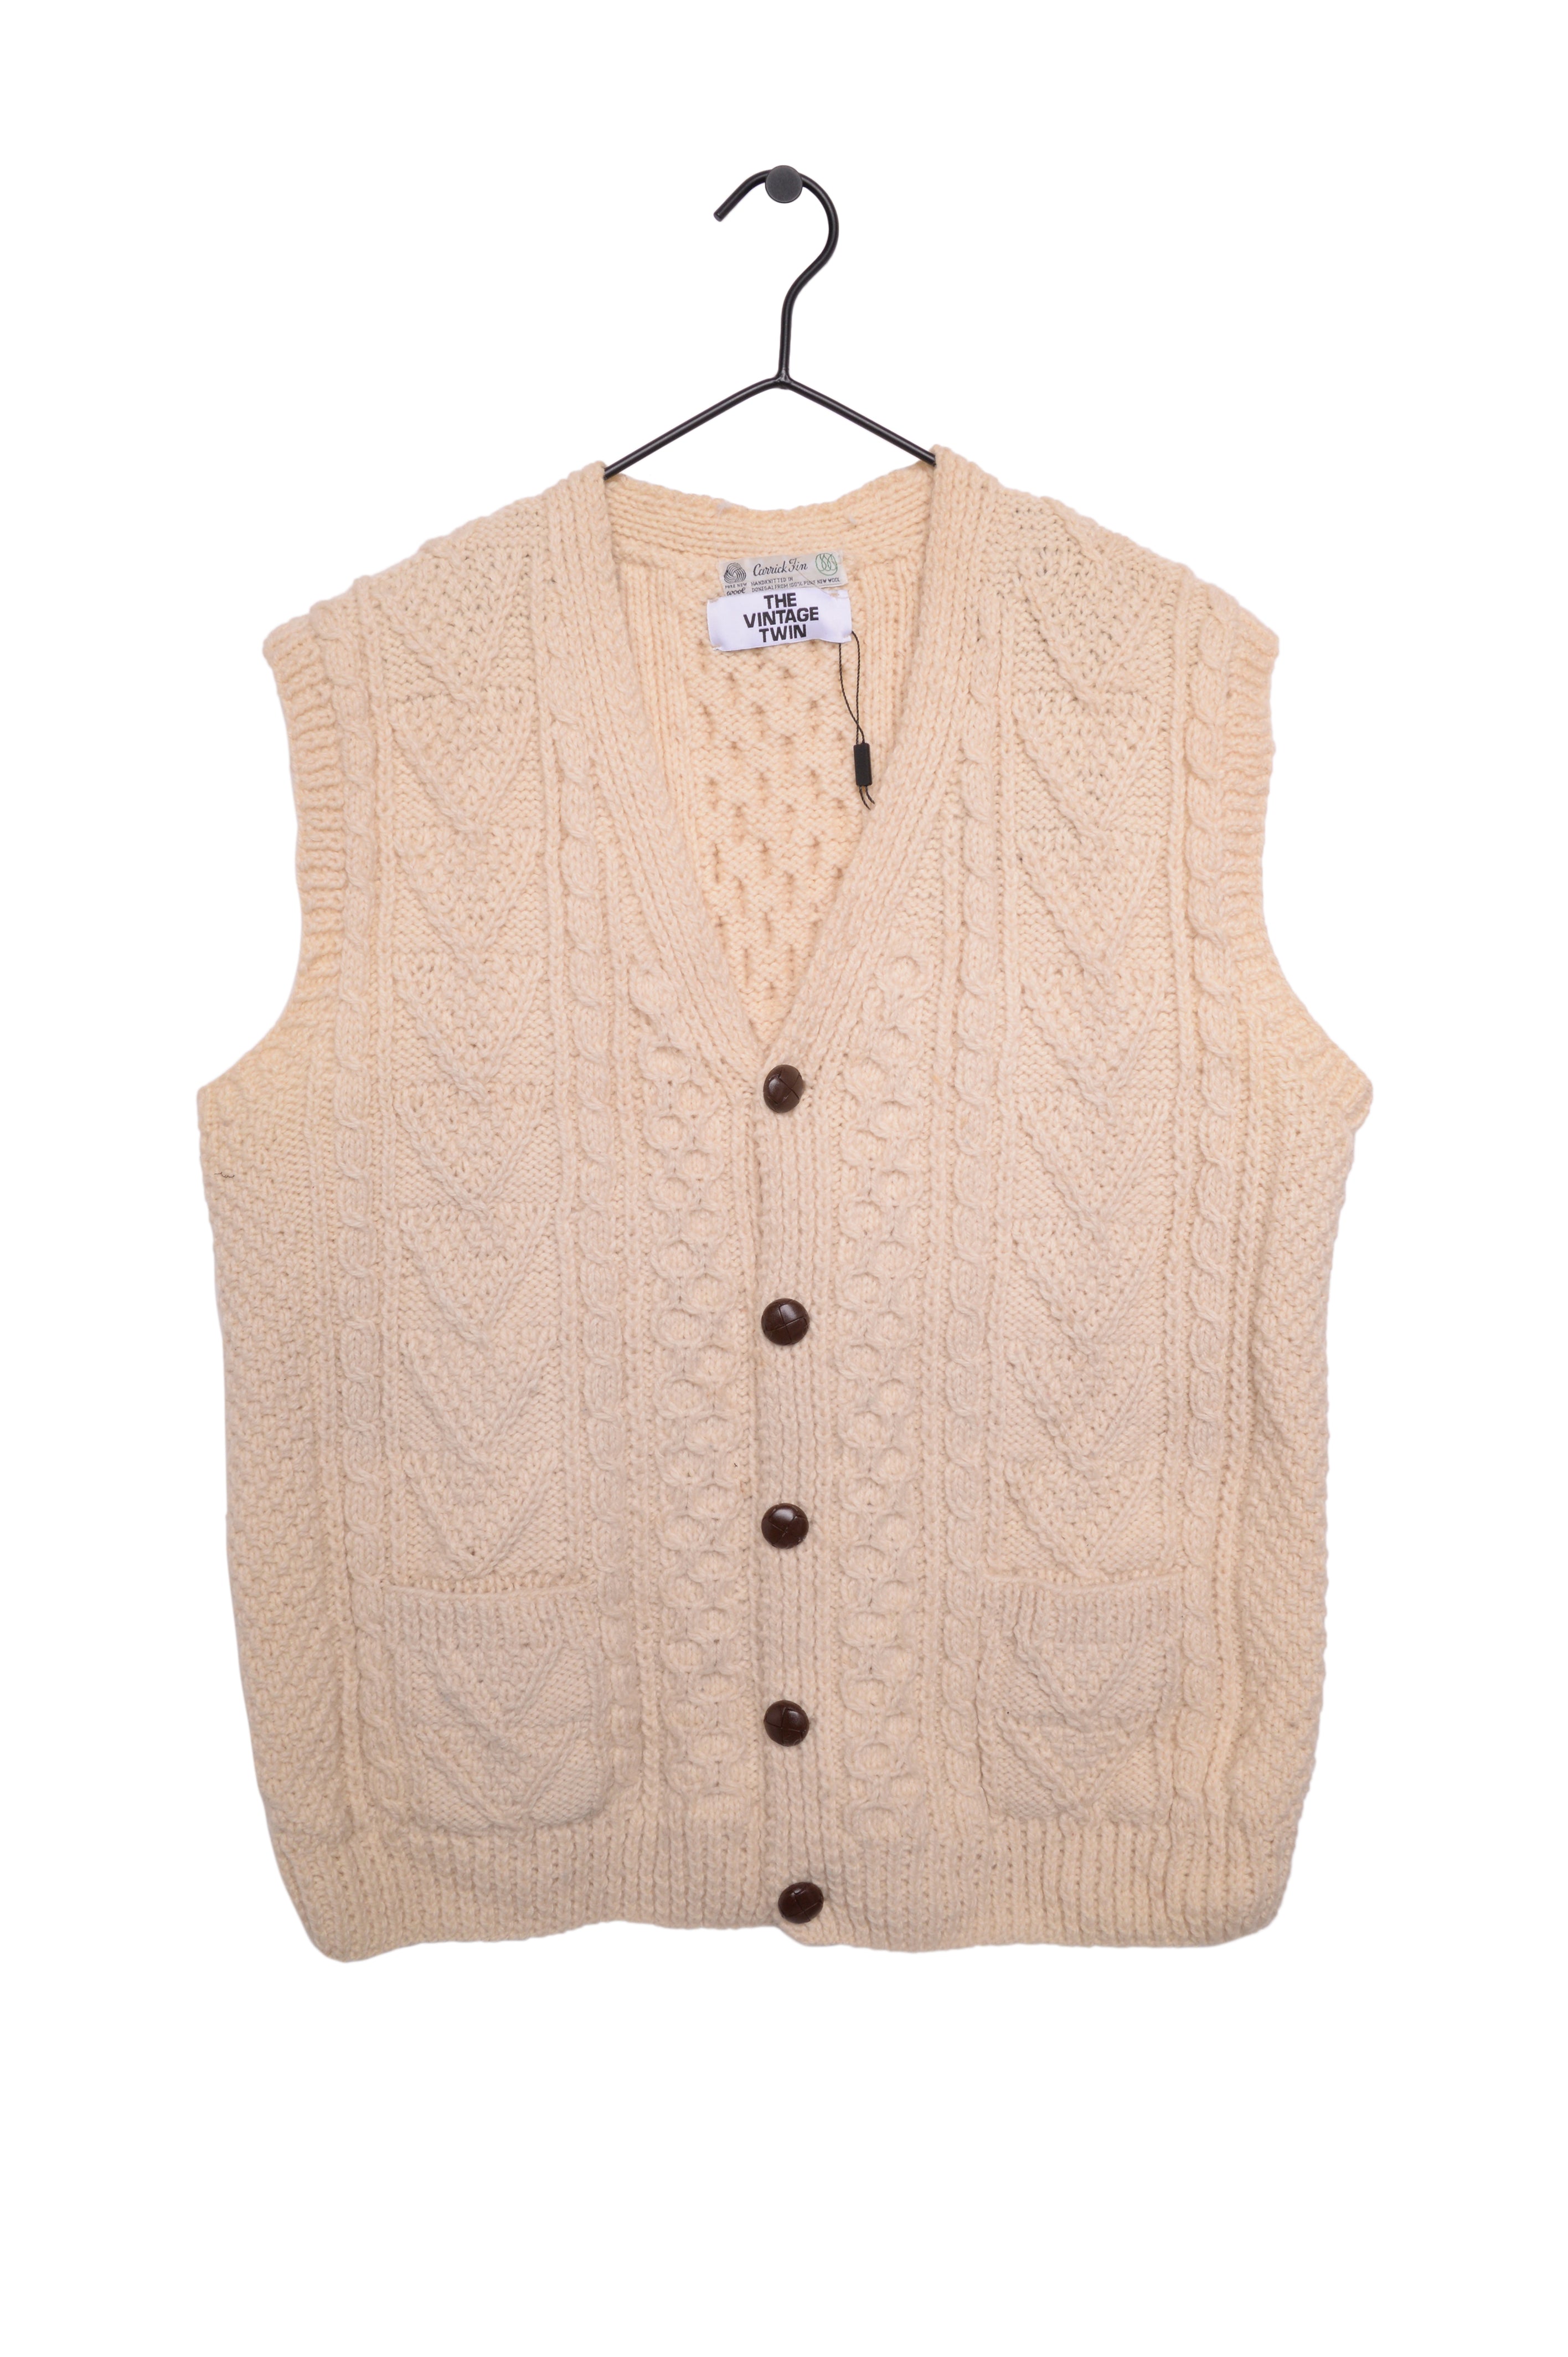 Irish Cable Knit Sweater Vest Free Shipping - The Vintage Twin